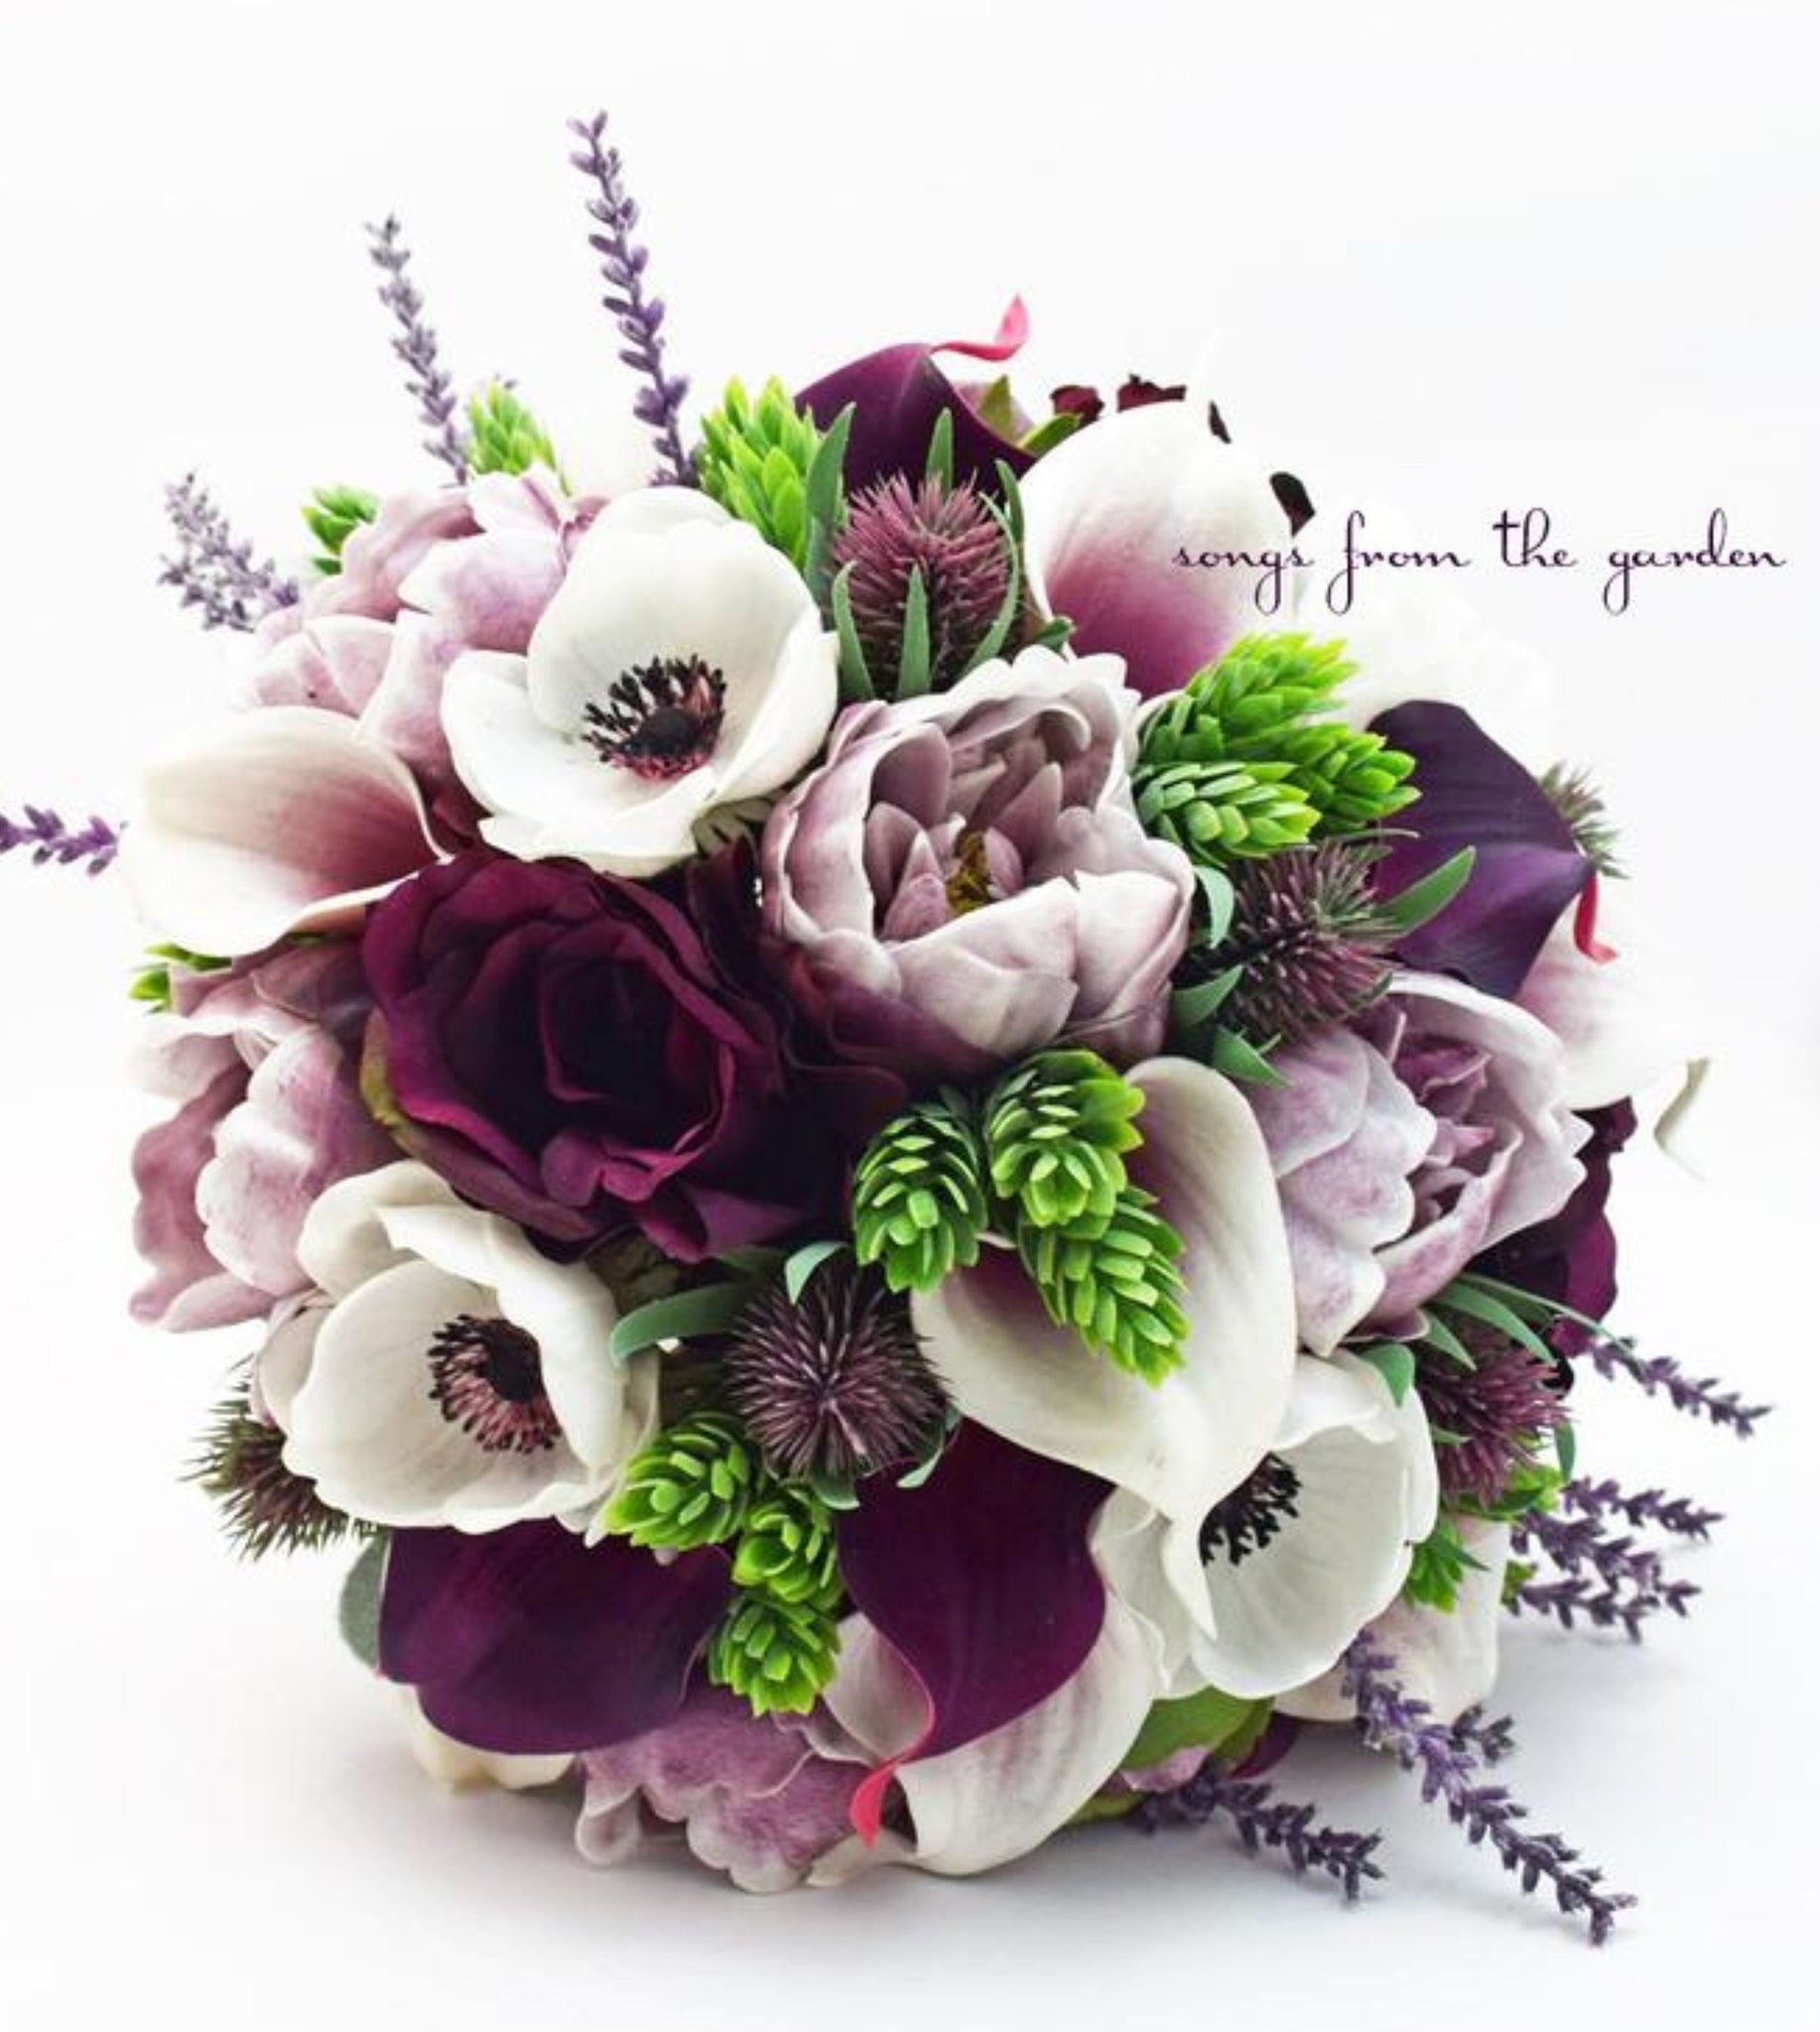 Cascade Bridal Bouquet in Plum Lavender Peonies Anemones Roses Callas - Add a Groom's Boutonniere or Matching Corsage Centerpieces & More!